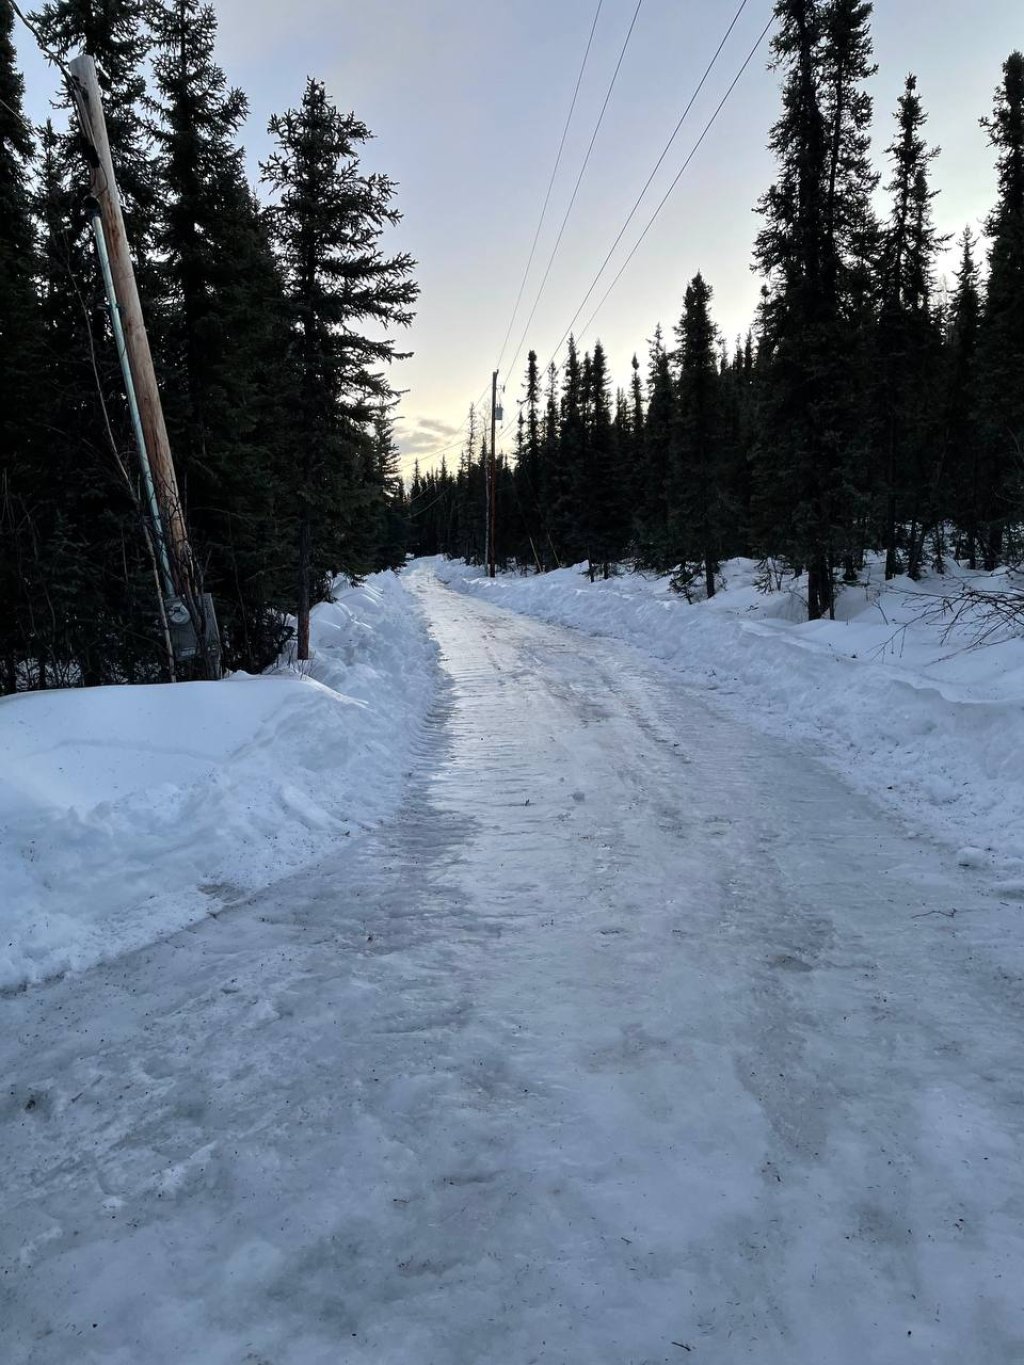 Road conditions in Fairbanks: skates recommended.